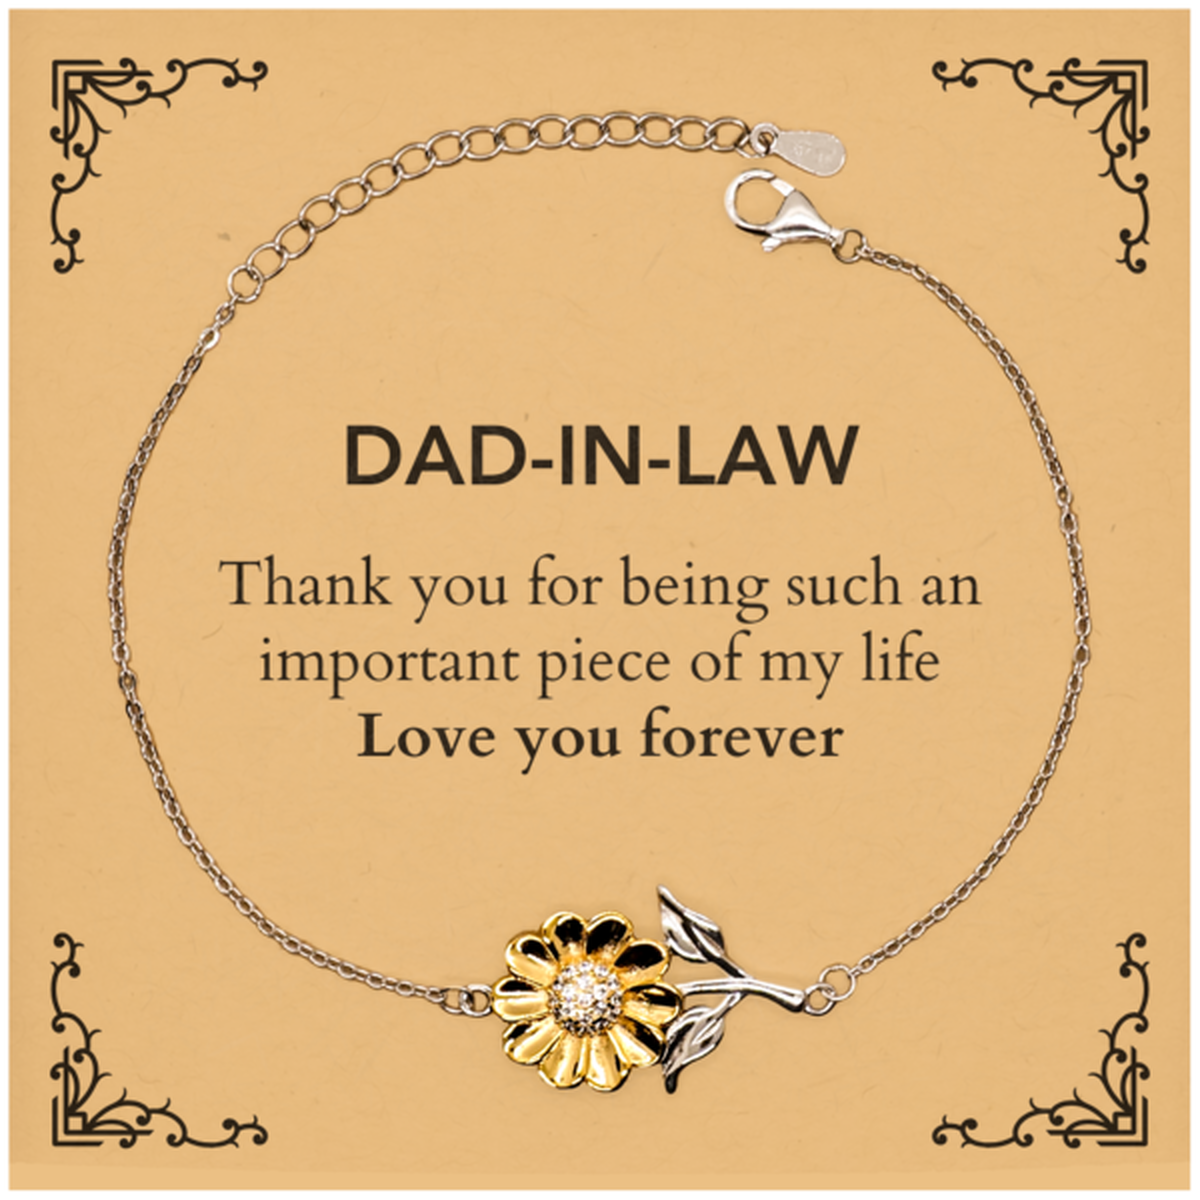 Appropriate Dad-in-law Sunflower Bracelet Epic Birthday Gifts for Dad-in-law Thank you for being such an important piece of my life Dad-in-law Christmas Mothers Fathers Day